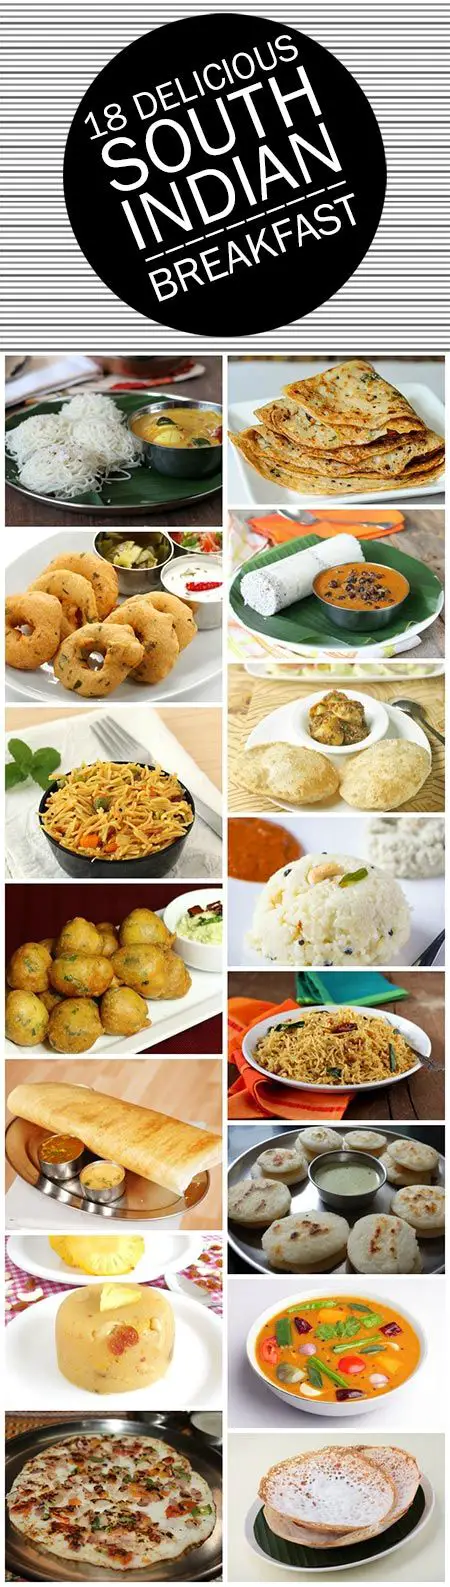 18 Delicious South Indian Breakfast Recipes You Must Try